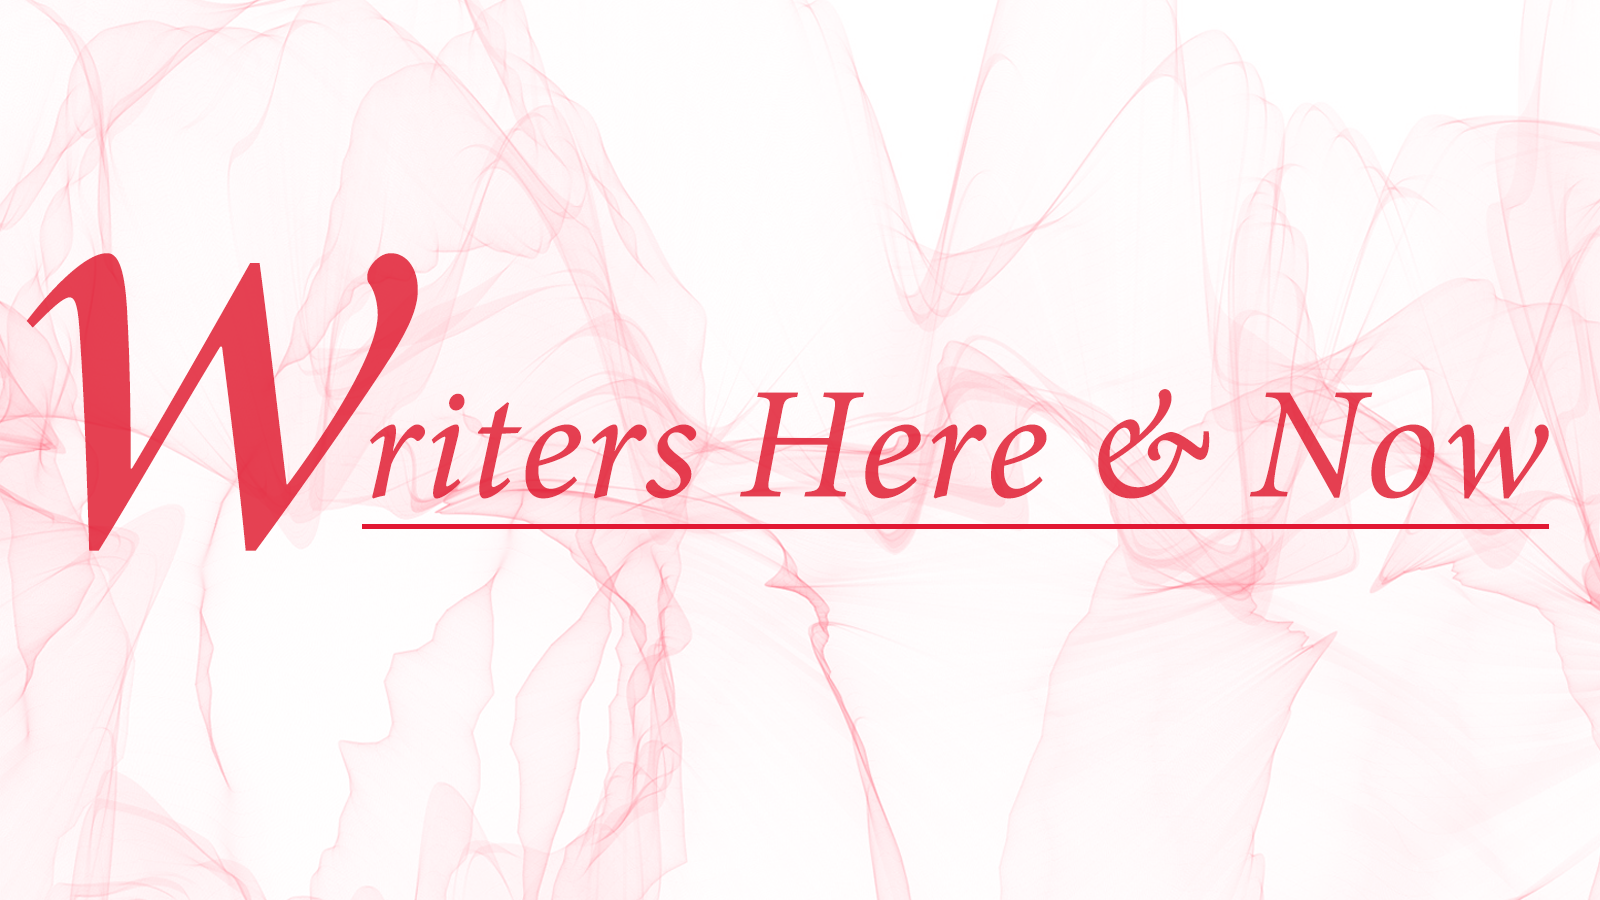 Writers Here and Now in red font against a red abstract background